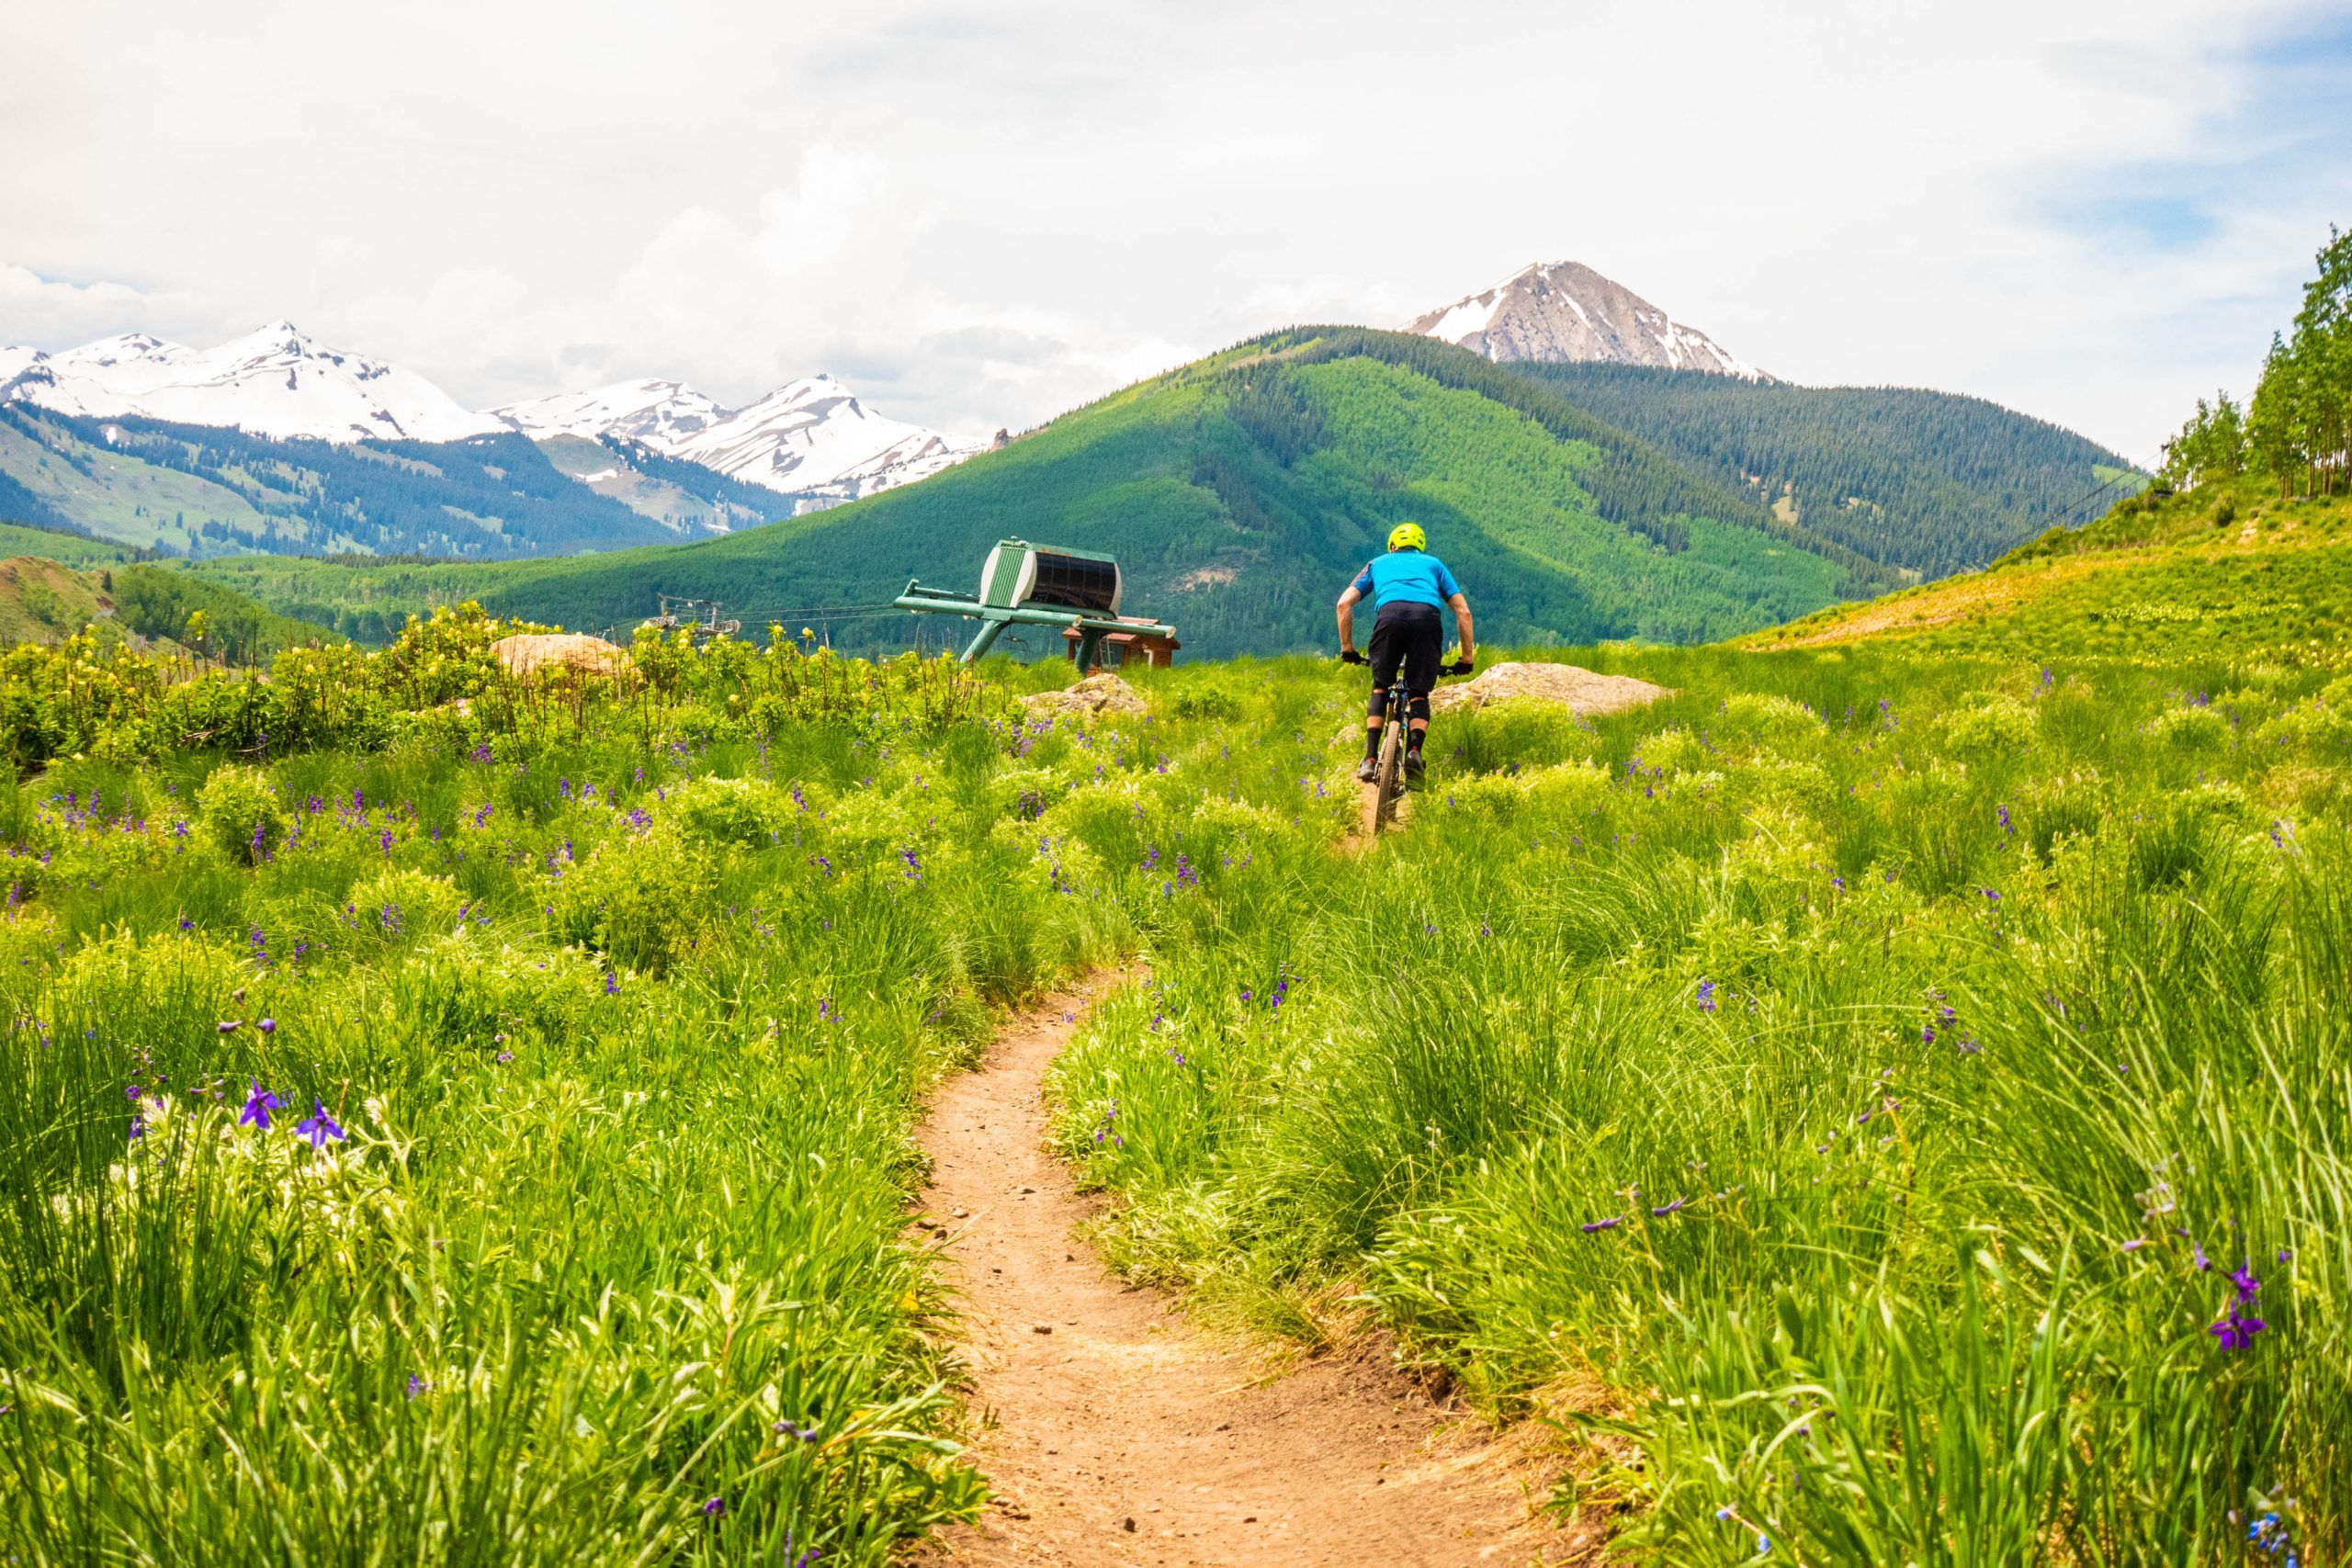 A mountain biker on a trail with the top of a ski lift. MTB crested butte mountain resort in crested butte, co